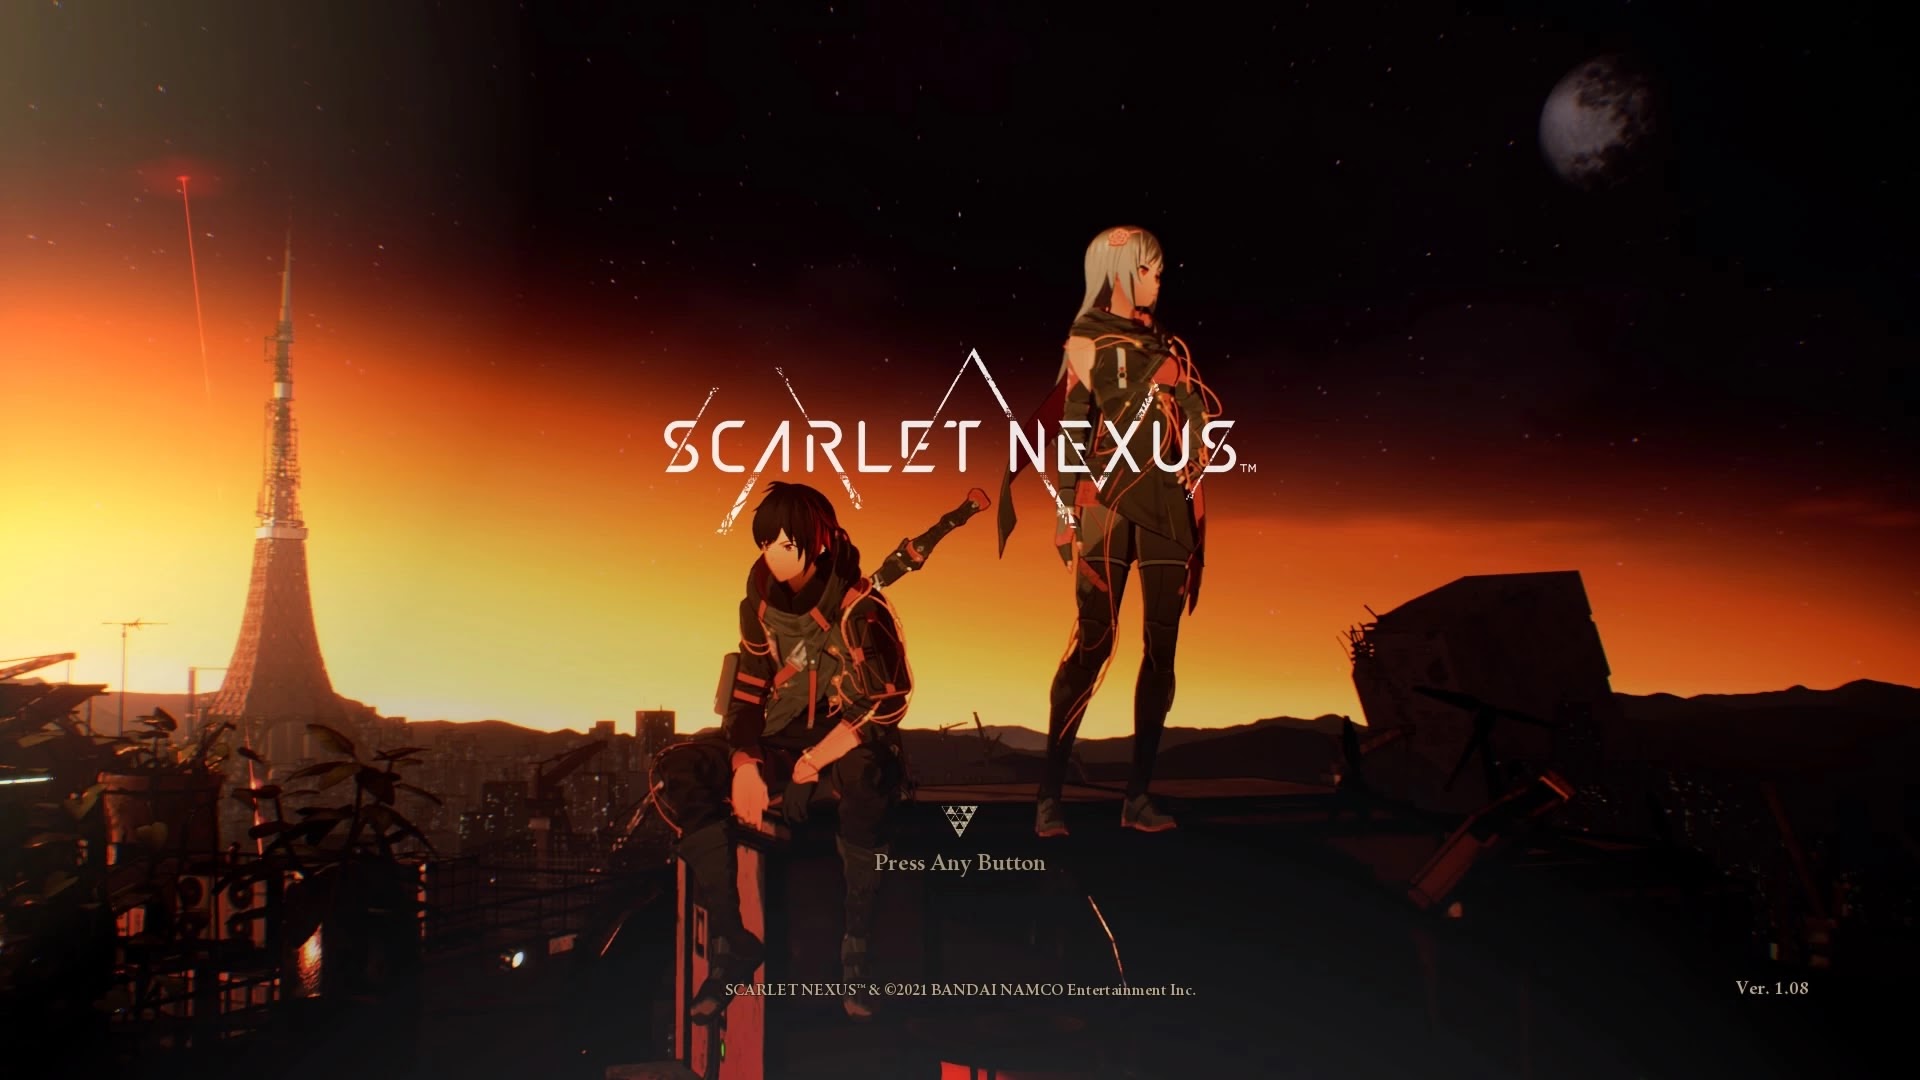 Roundup: Here's What The Critics Are Saying About Scarlet Nexus